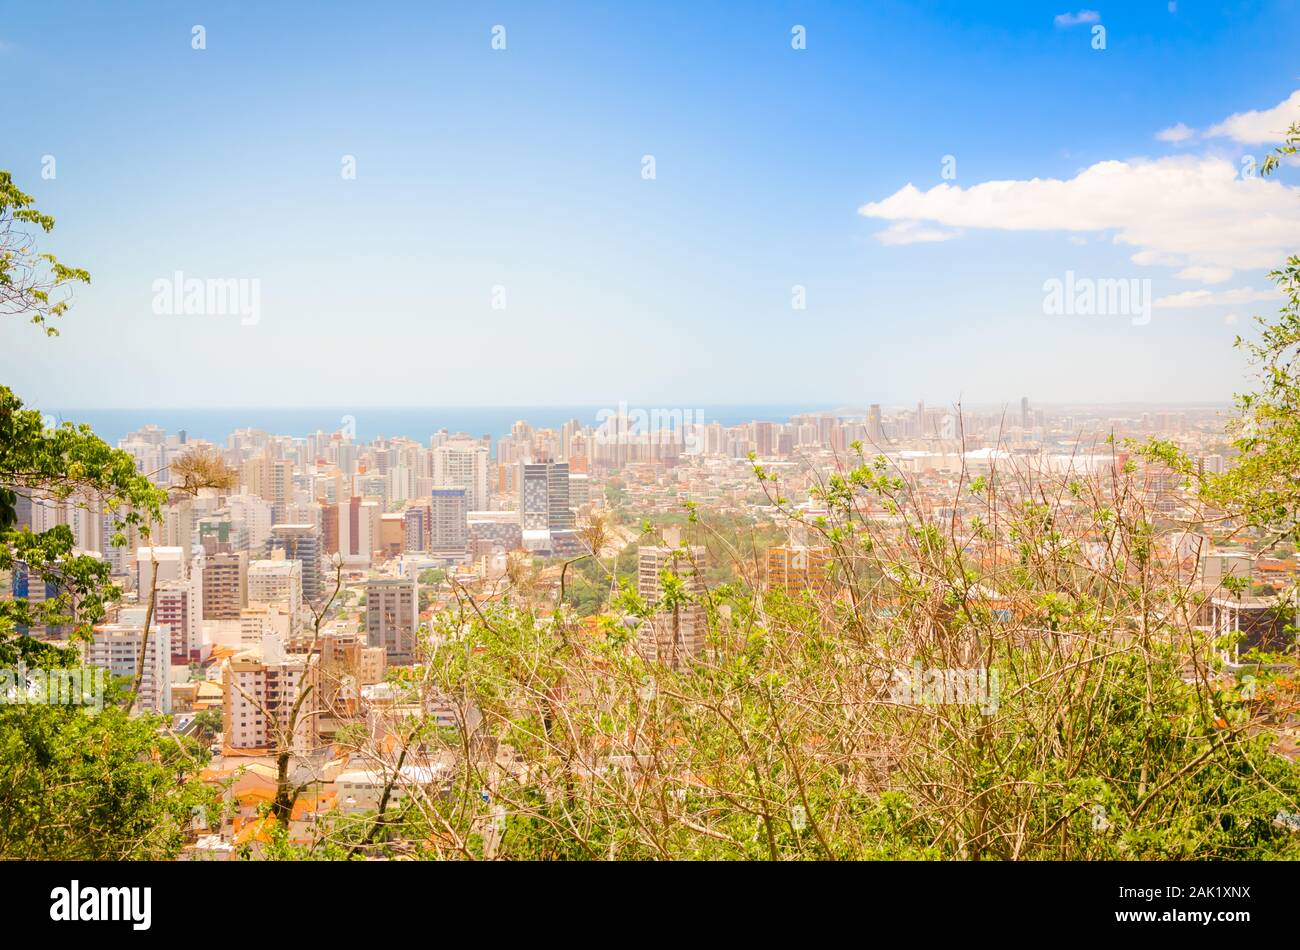 On top of the mountain overlooking the city on a sunny day Stock Photo